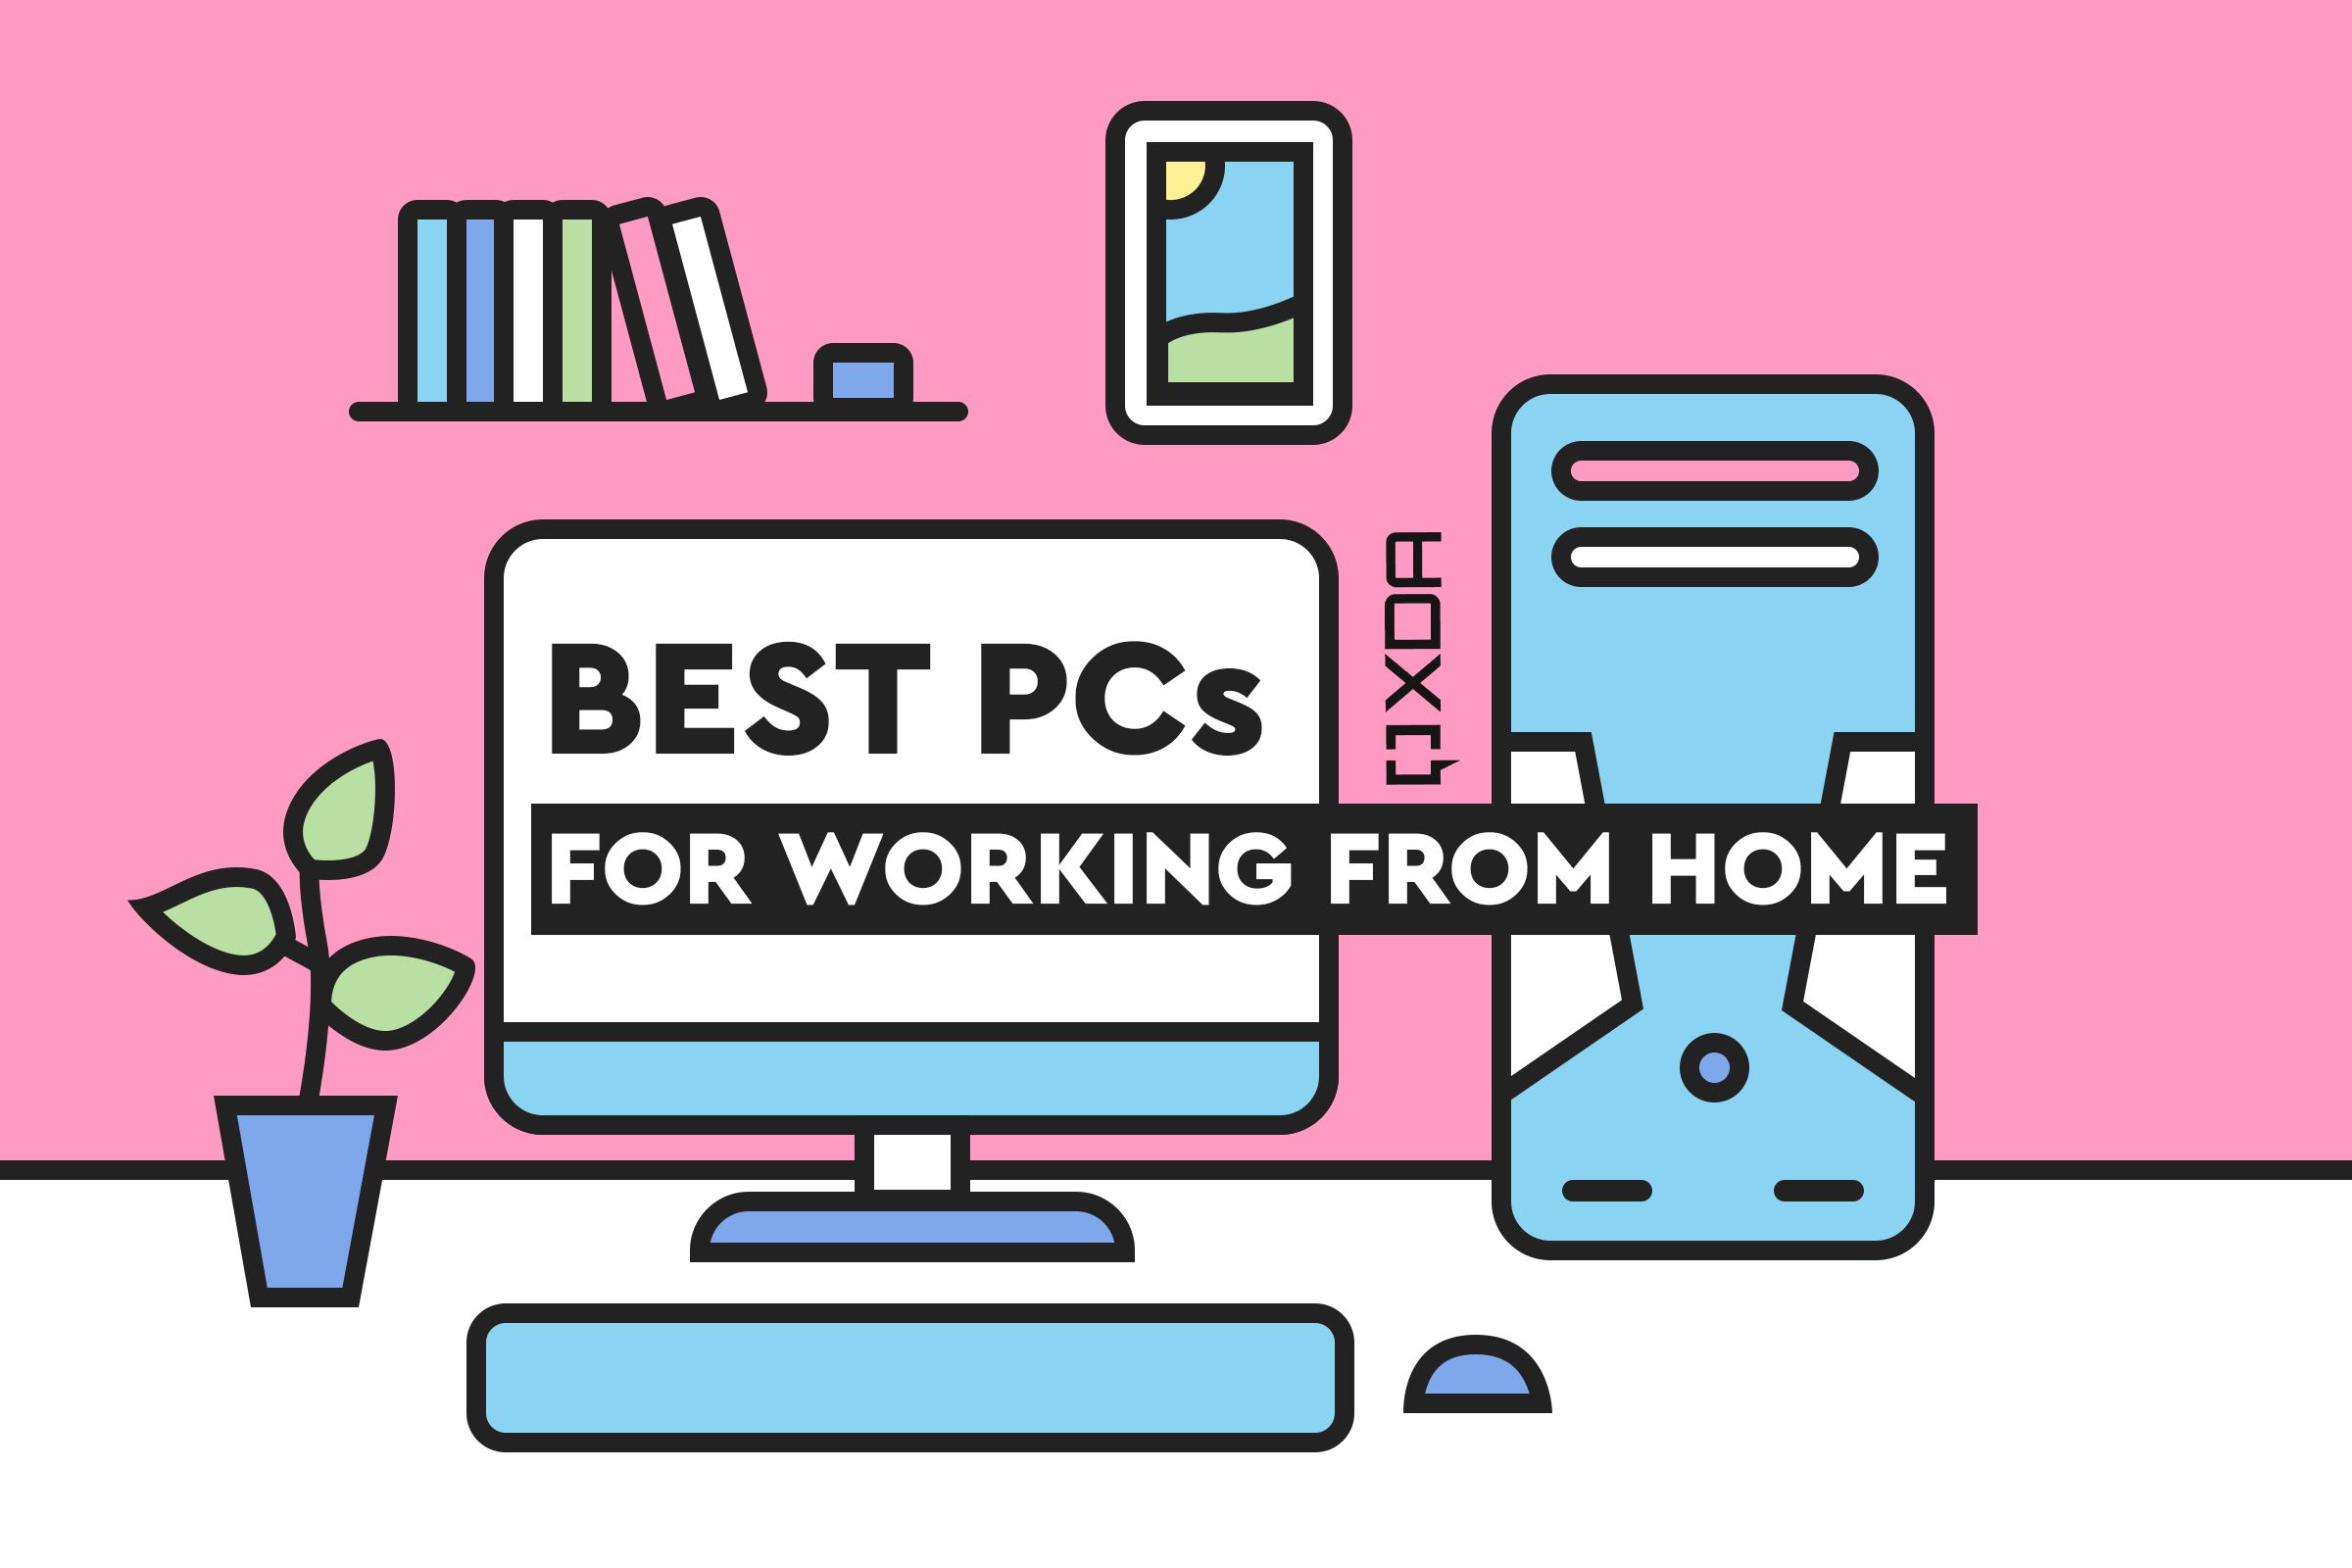 Best PCs for working from home